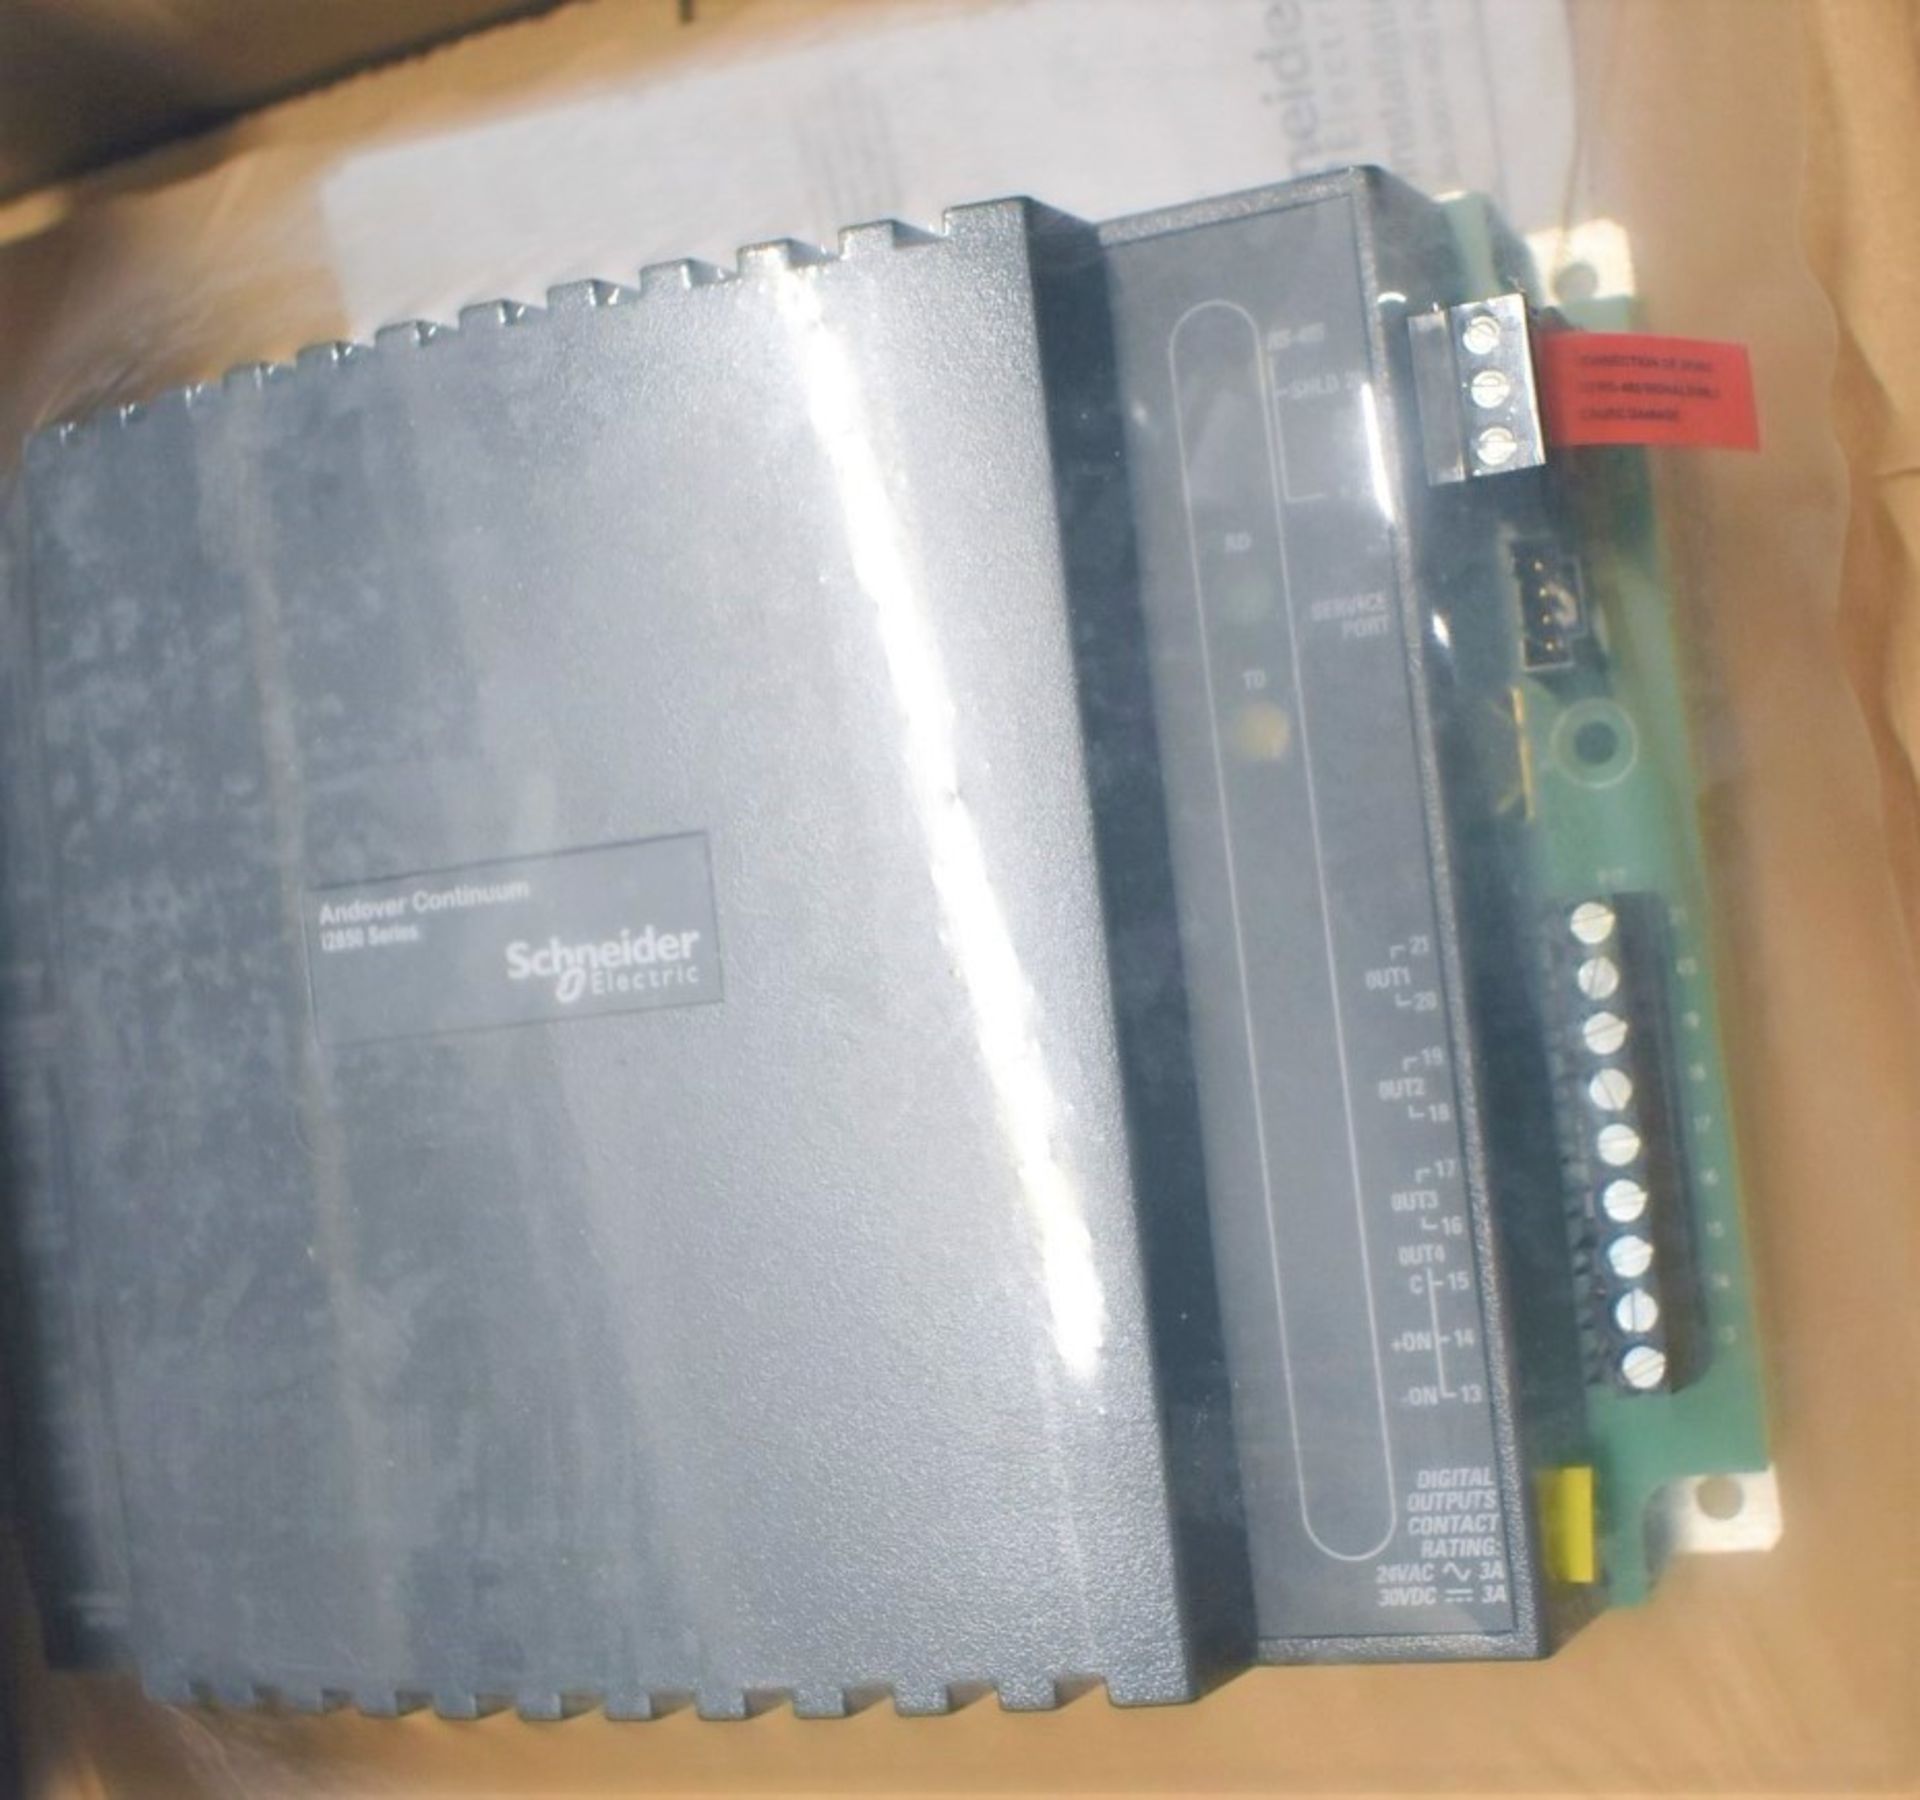 1 x Schneider Electric Andover Continuum i2851 Infinit II Controller - Unused Boxed Stock - Image 2 of 5